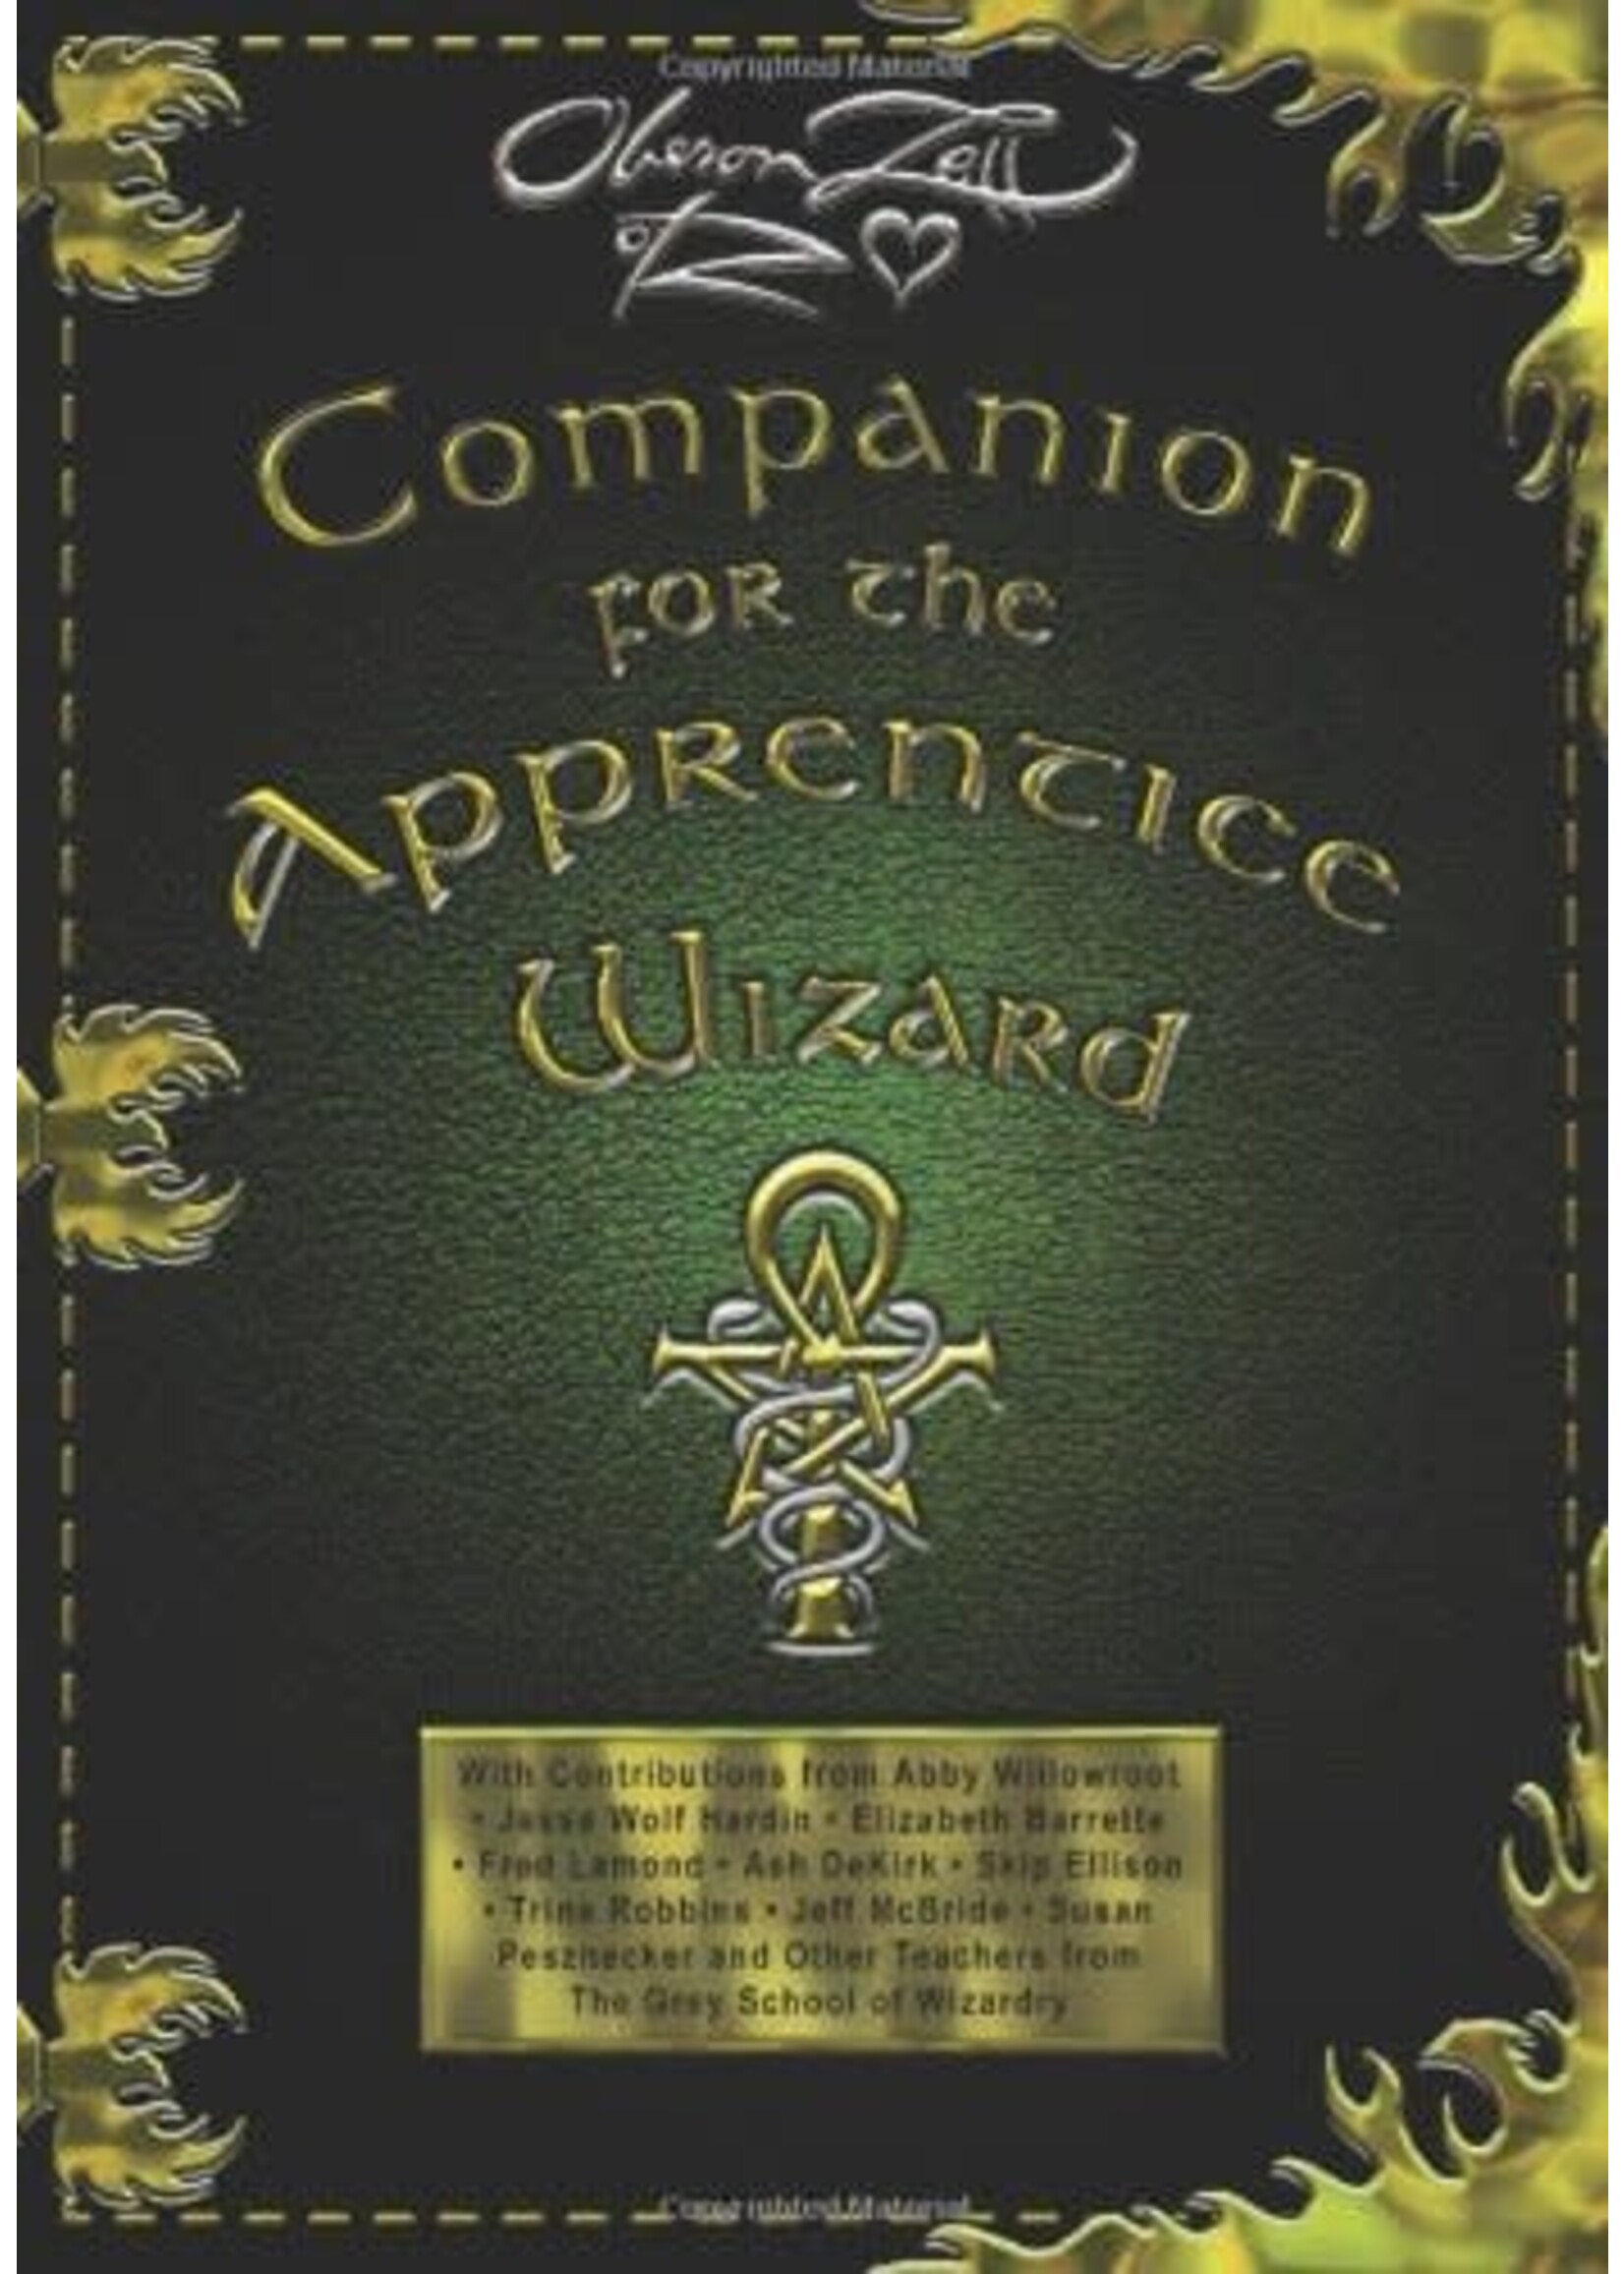 Companion for the Apprentice Wizard by Oberon Zell-Ravenheart